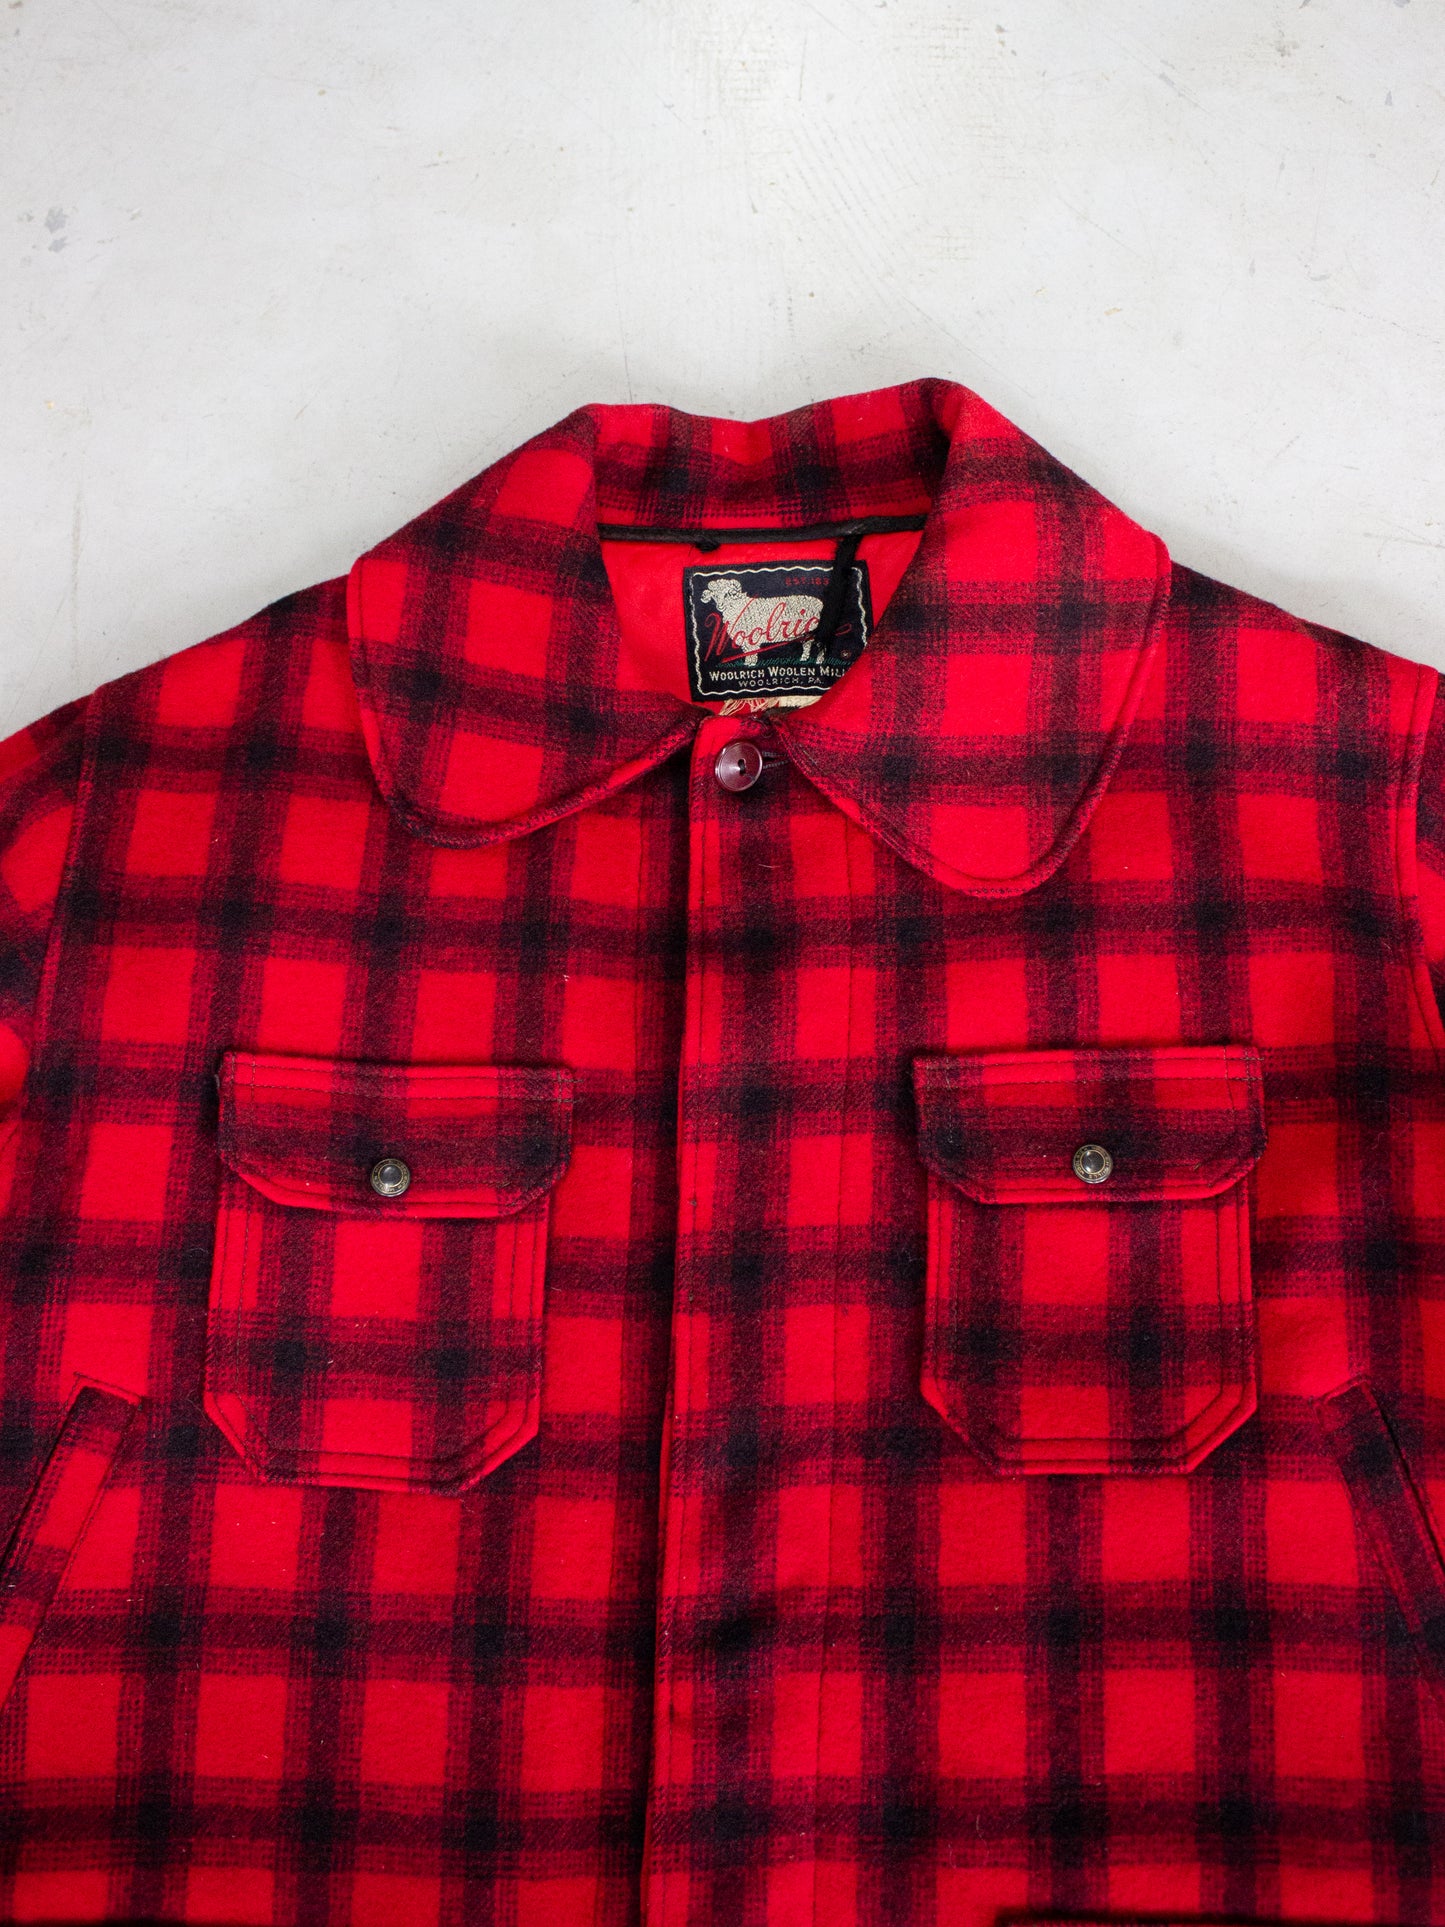 1950's-1960's Woolrich Red Buffalo Plaid Hunting Jacket Style 523 (X Large)